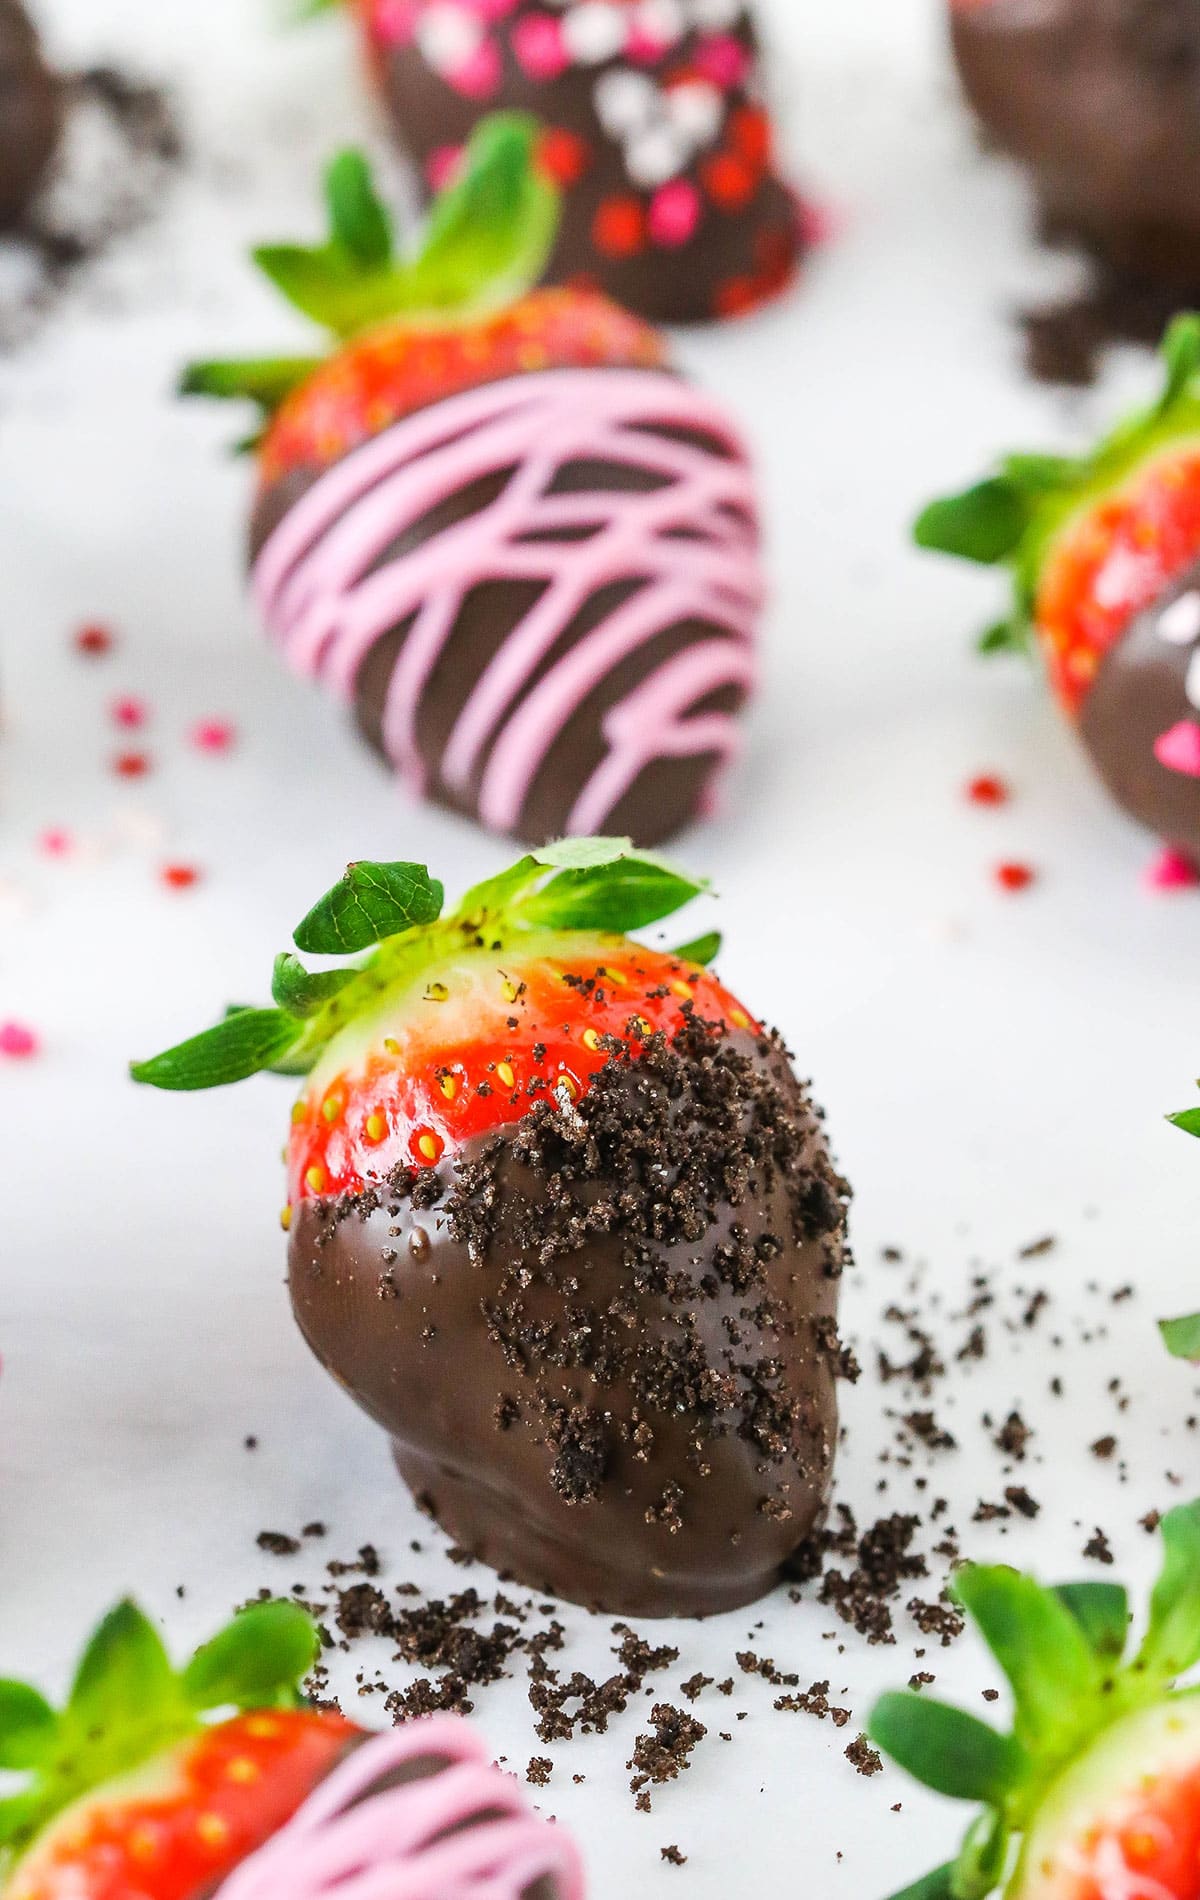 chocolate covered strawberry decorating ideas